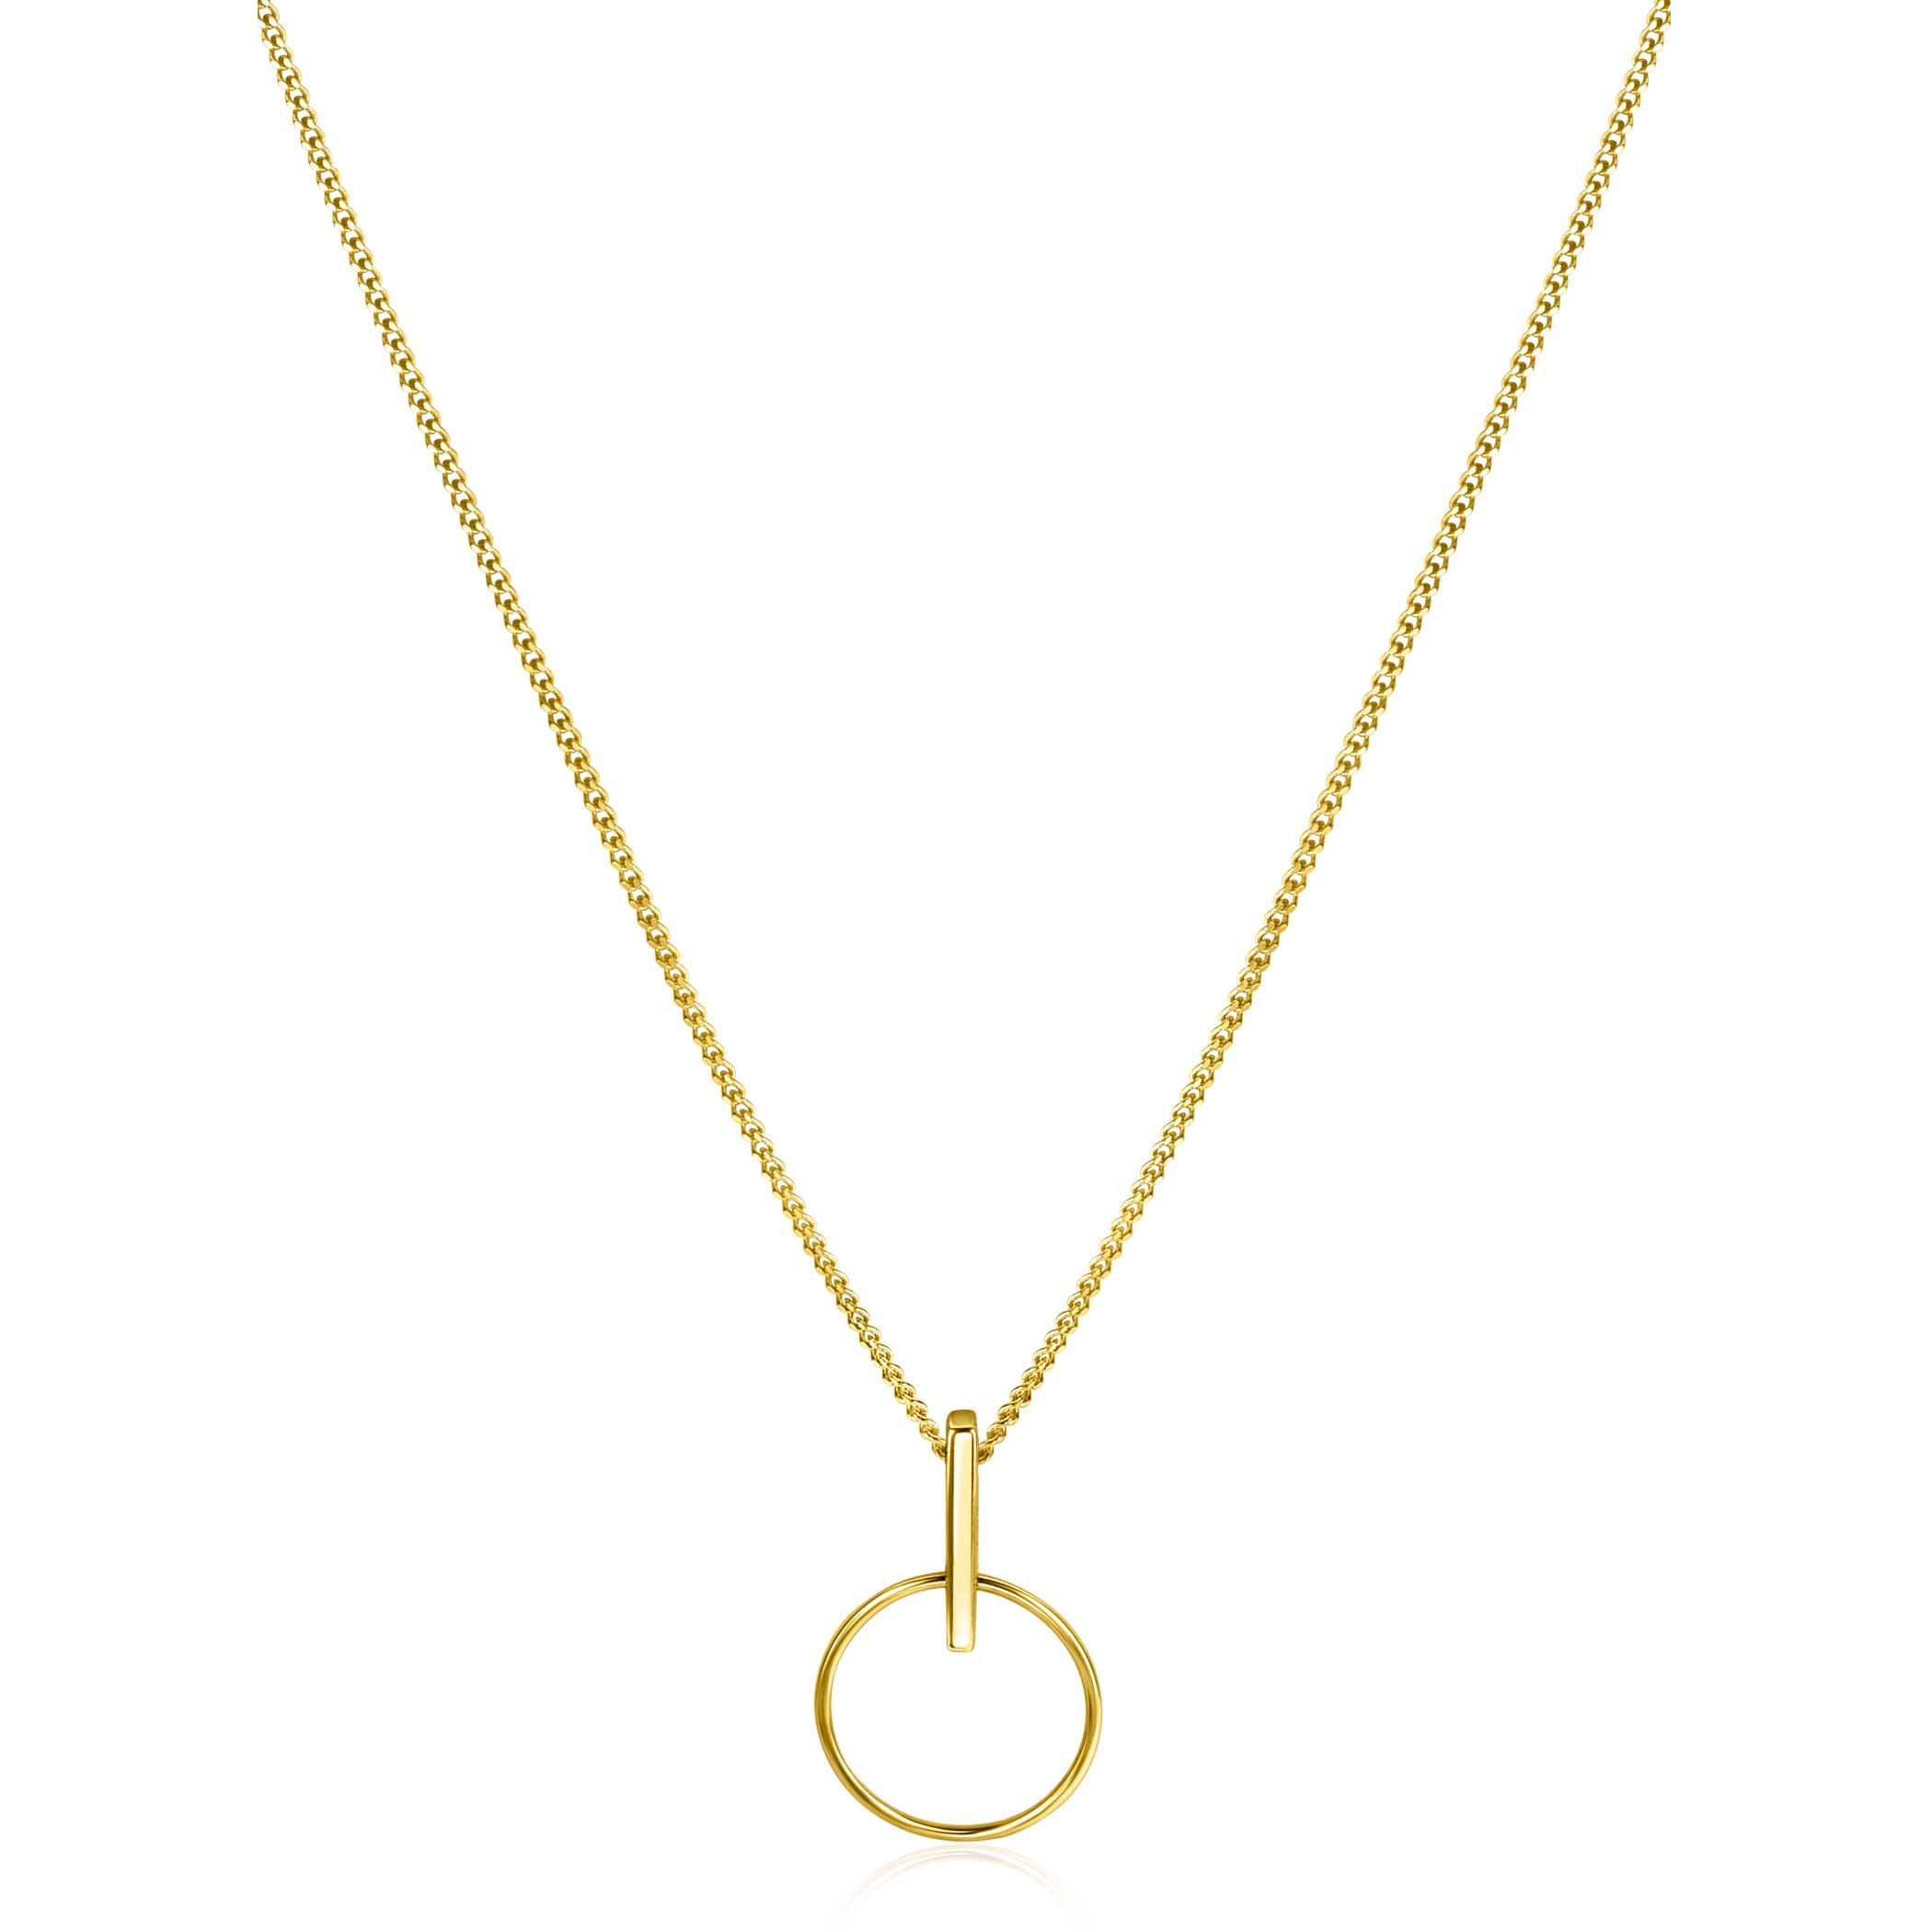 18mm ZINZI 14K Gold Pendant Open Circle and Trendy Bar as Bail ZGH404 (excl. necklace)